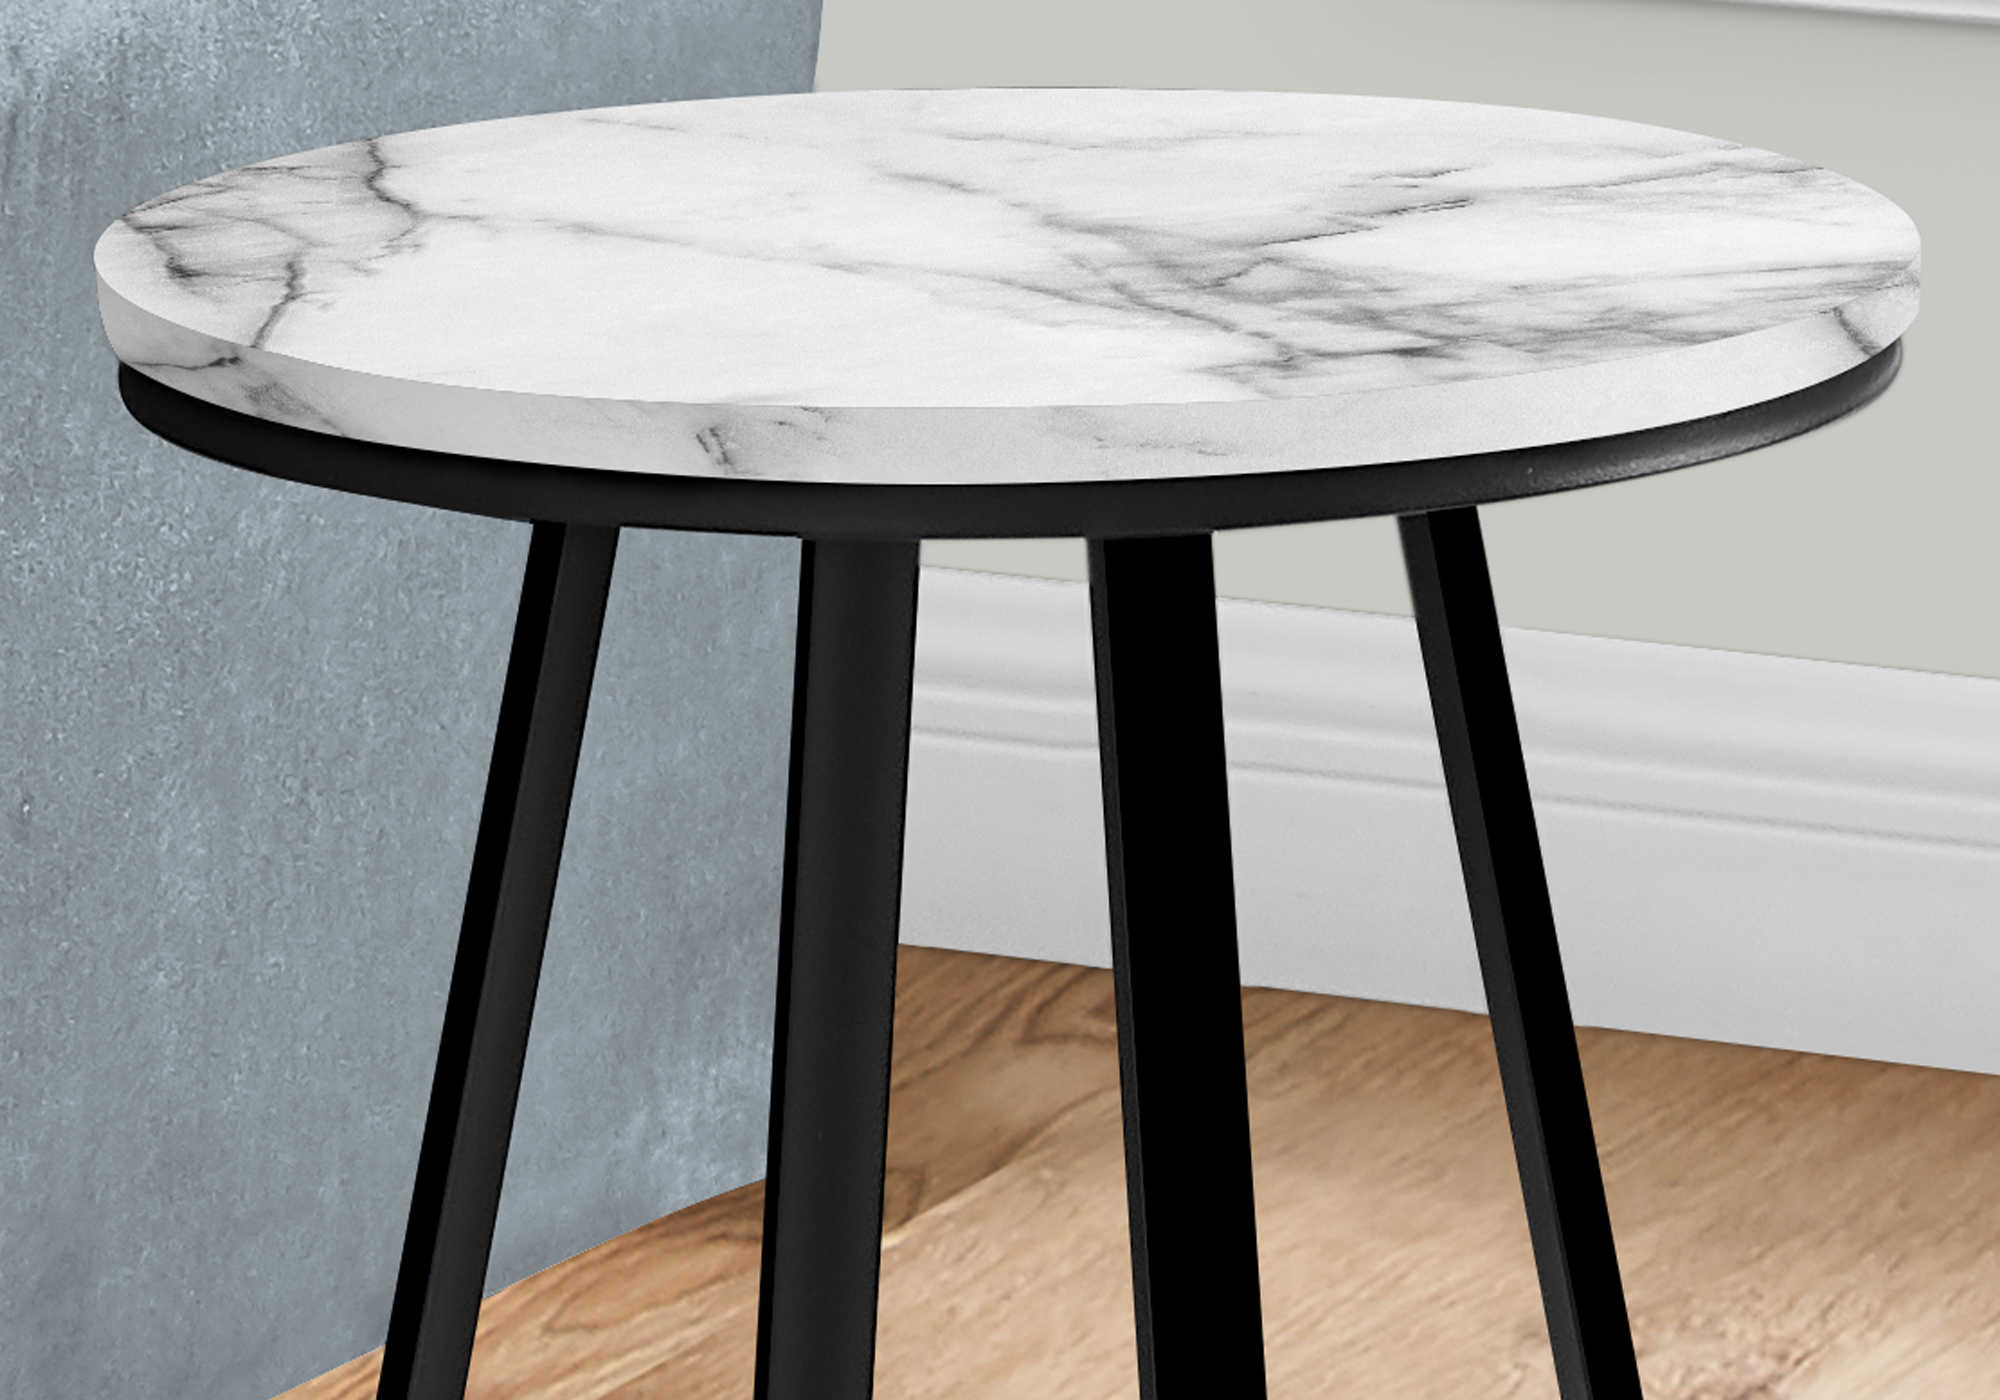 I 2178 - ACCENT TABLE - 22"H / WHITE MARBLE / BLACK METAL BY MONARCH SPECIALTIES INC